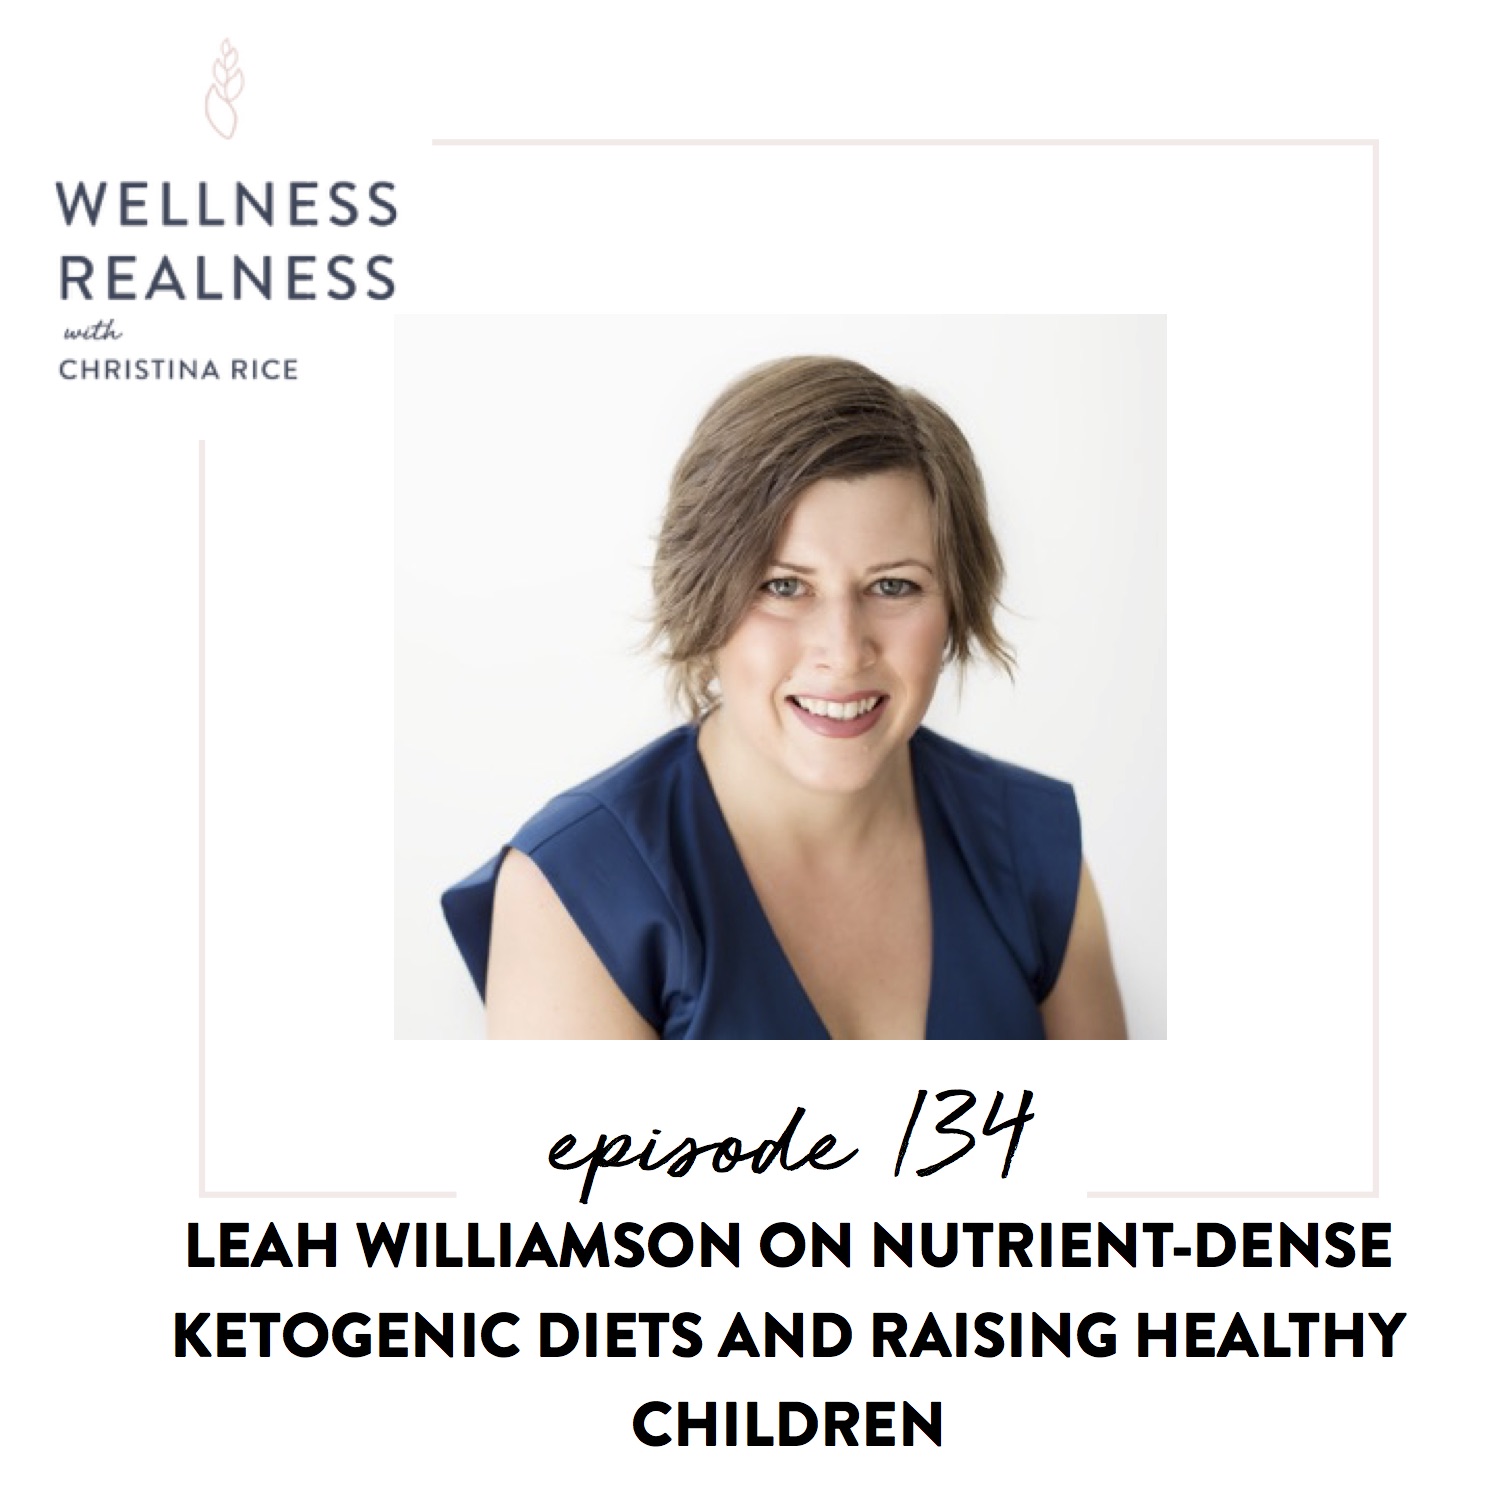 134: Leah Williamson on Nutrient-Dense Ketogenic Diets and Raising Healthy Children